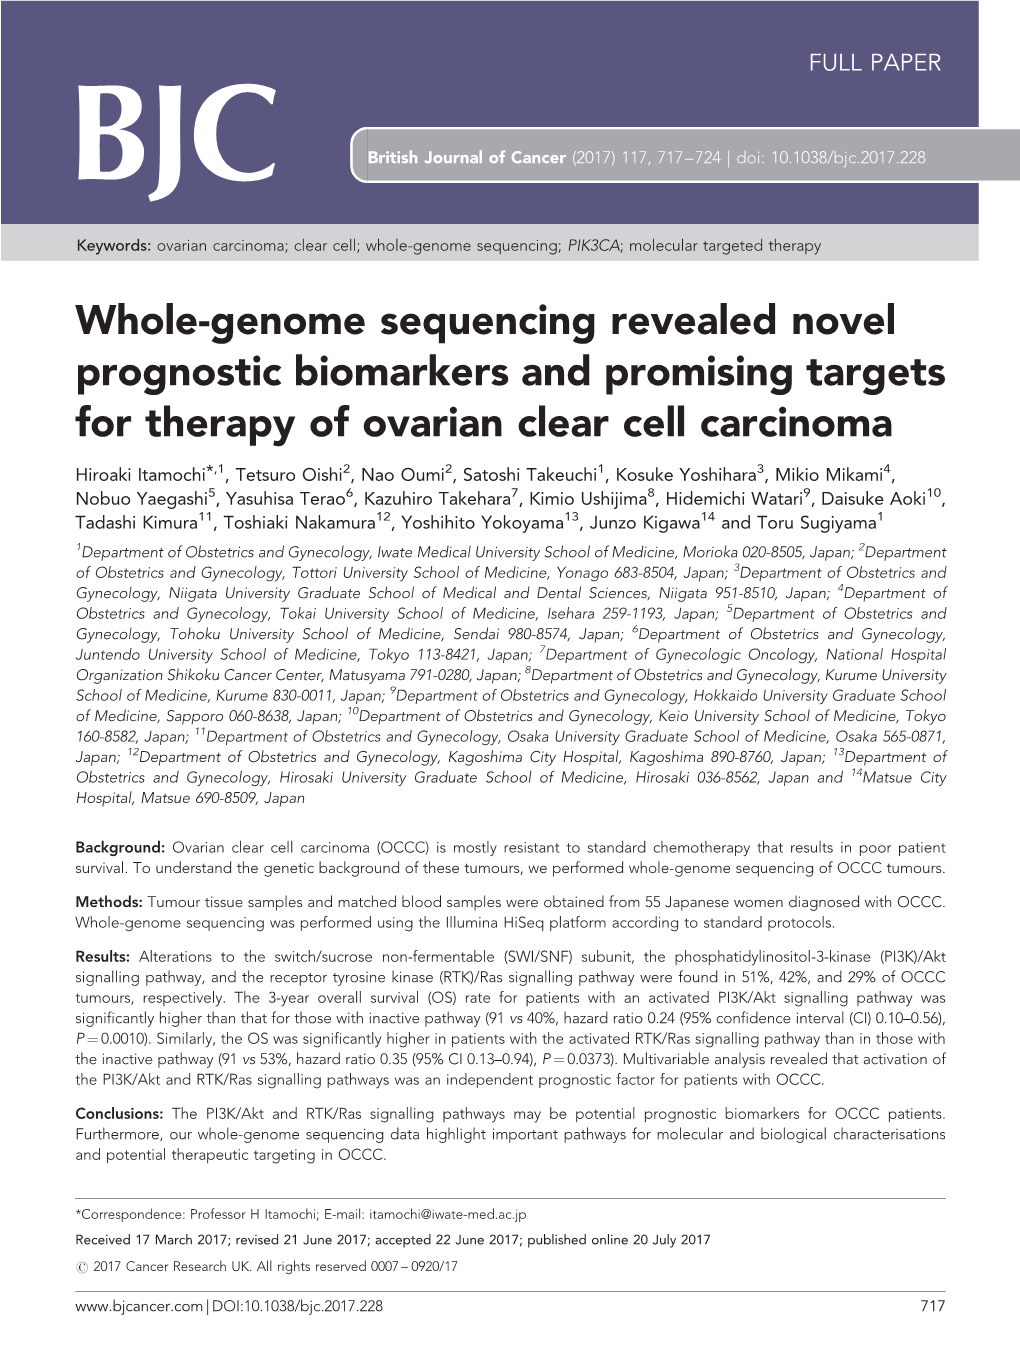 Whole-Genome Sequencing Revealed Novel Prognostic Biomarkers and Promising Targets for Therapy of Ovarian Clear Cell Carcinoma